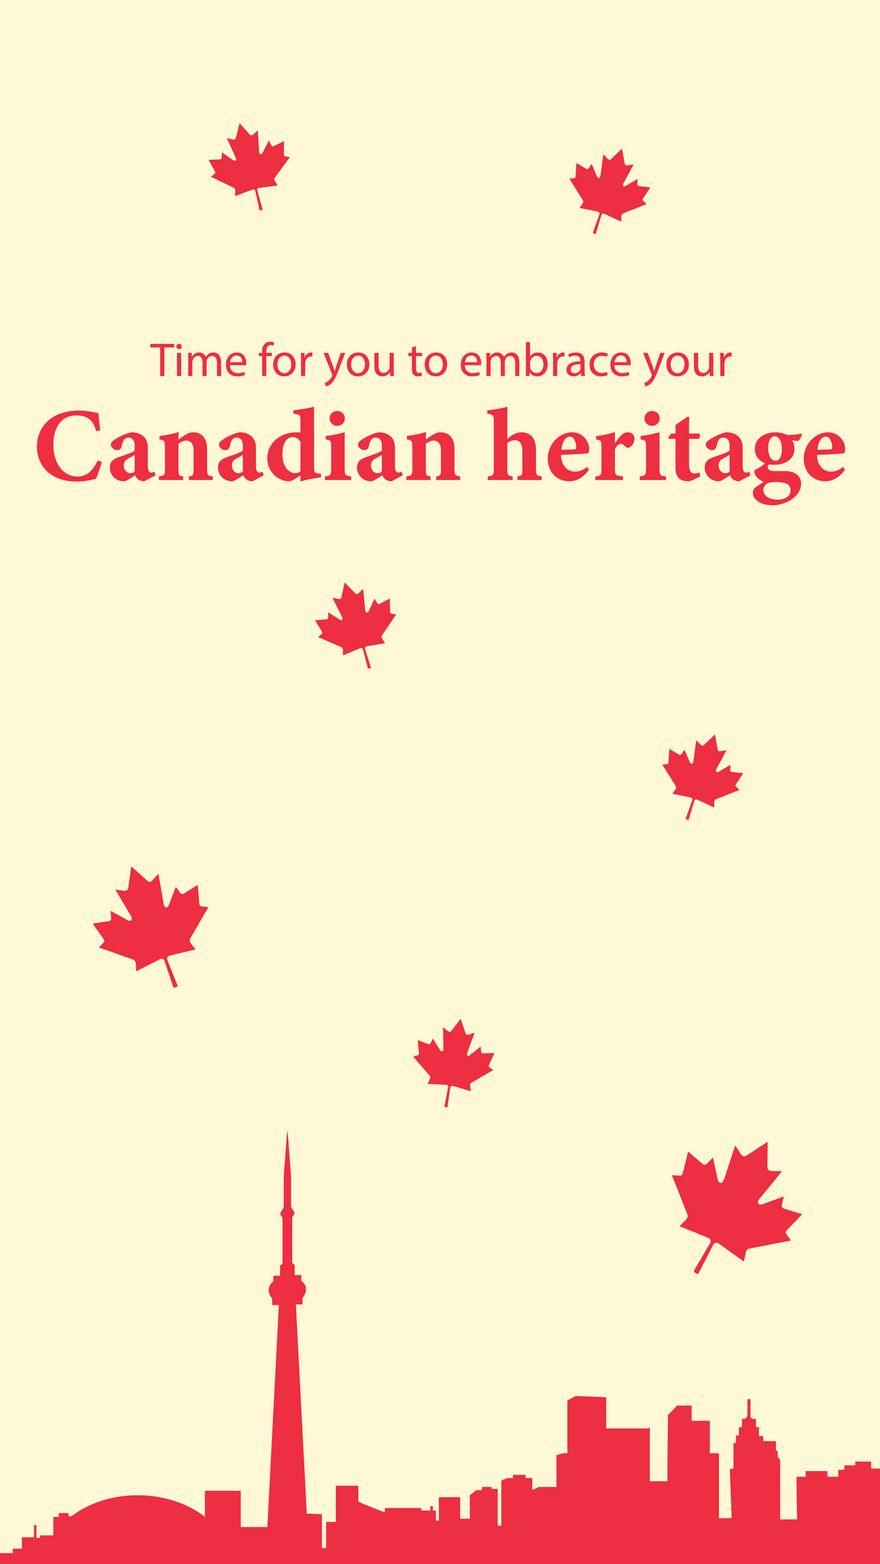 Free Canada Day Greeting Card Background